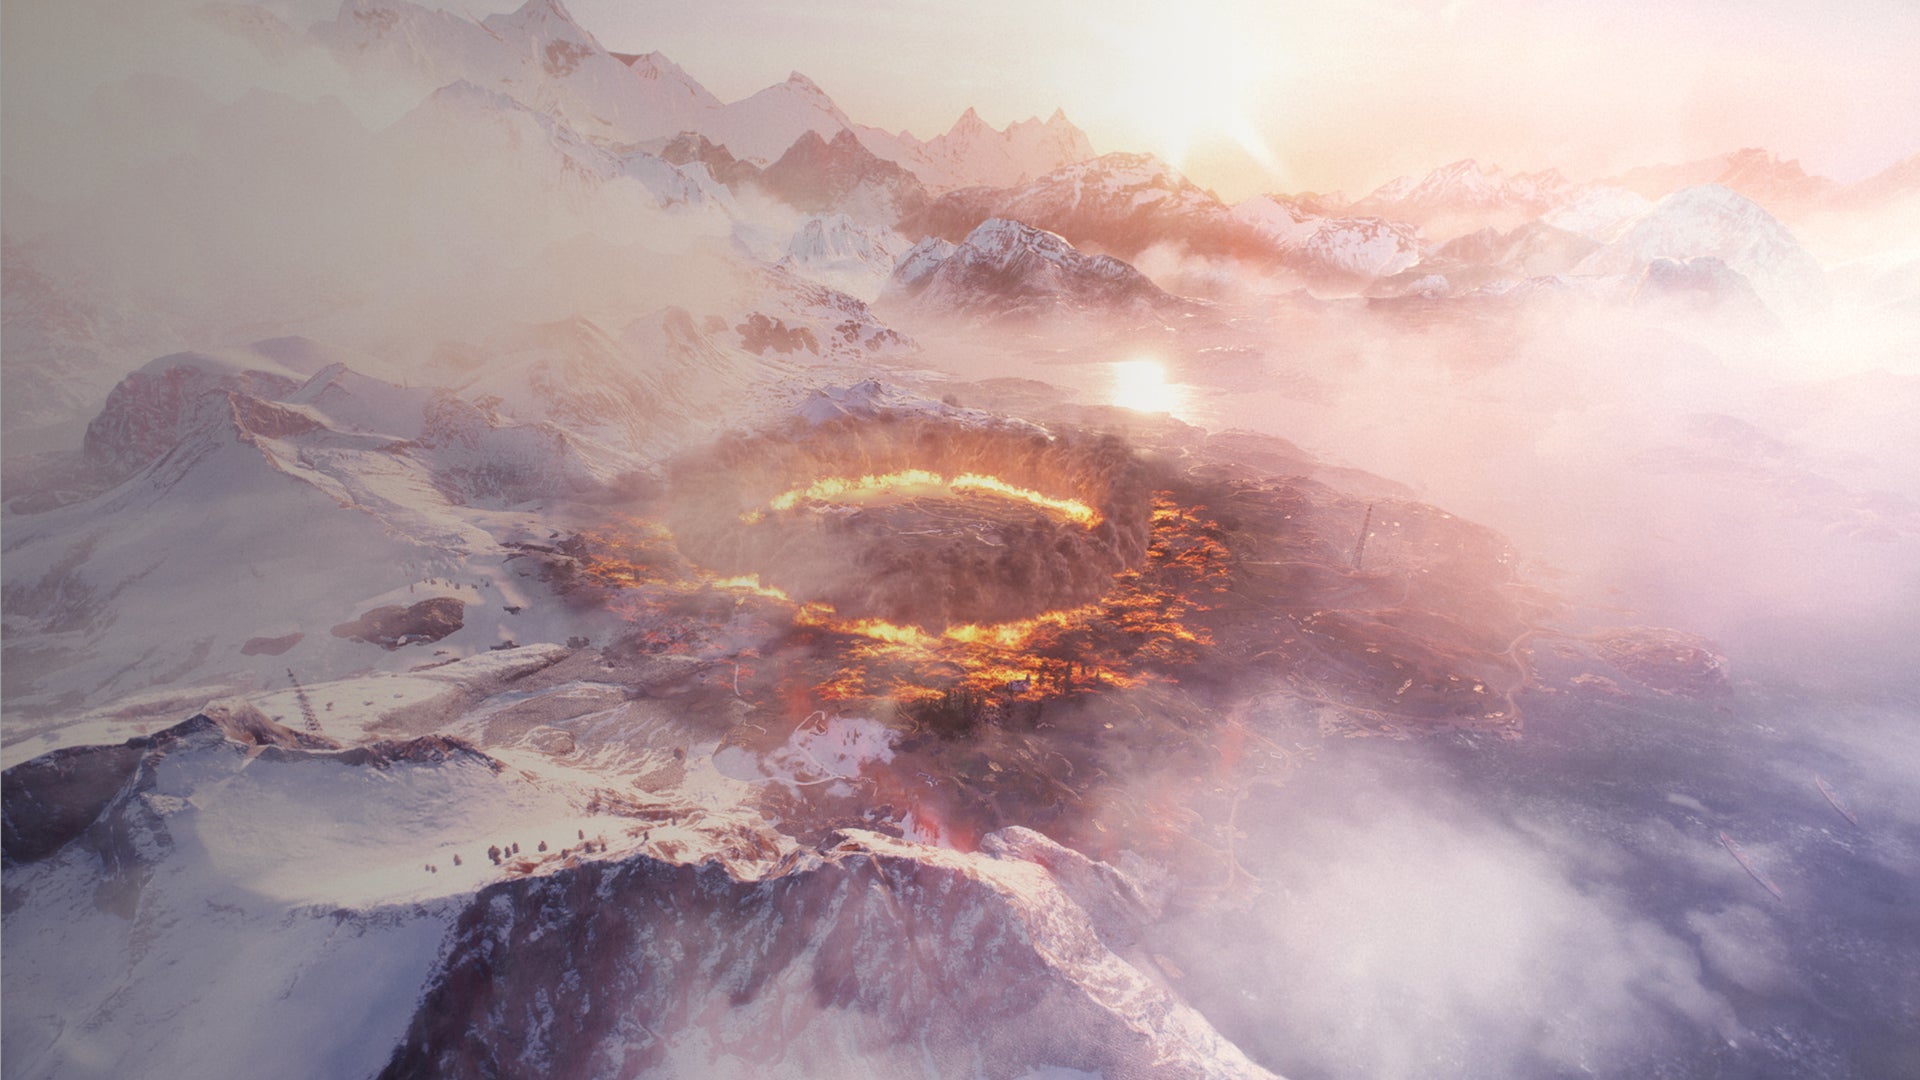 Image for Battlefield V's battle royale mode will have objectives and tanks